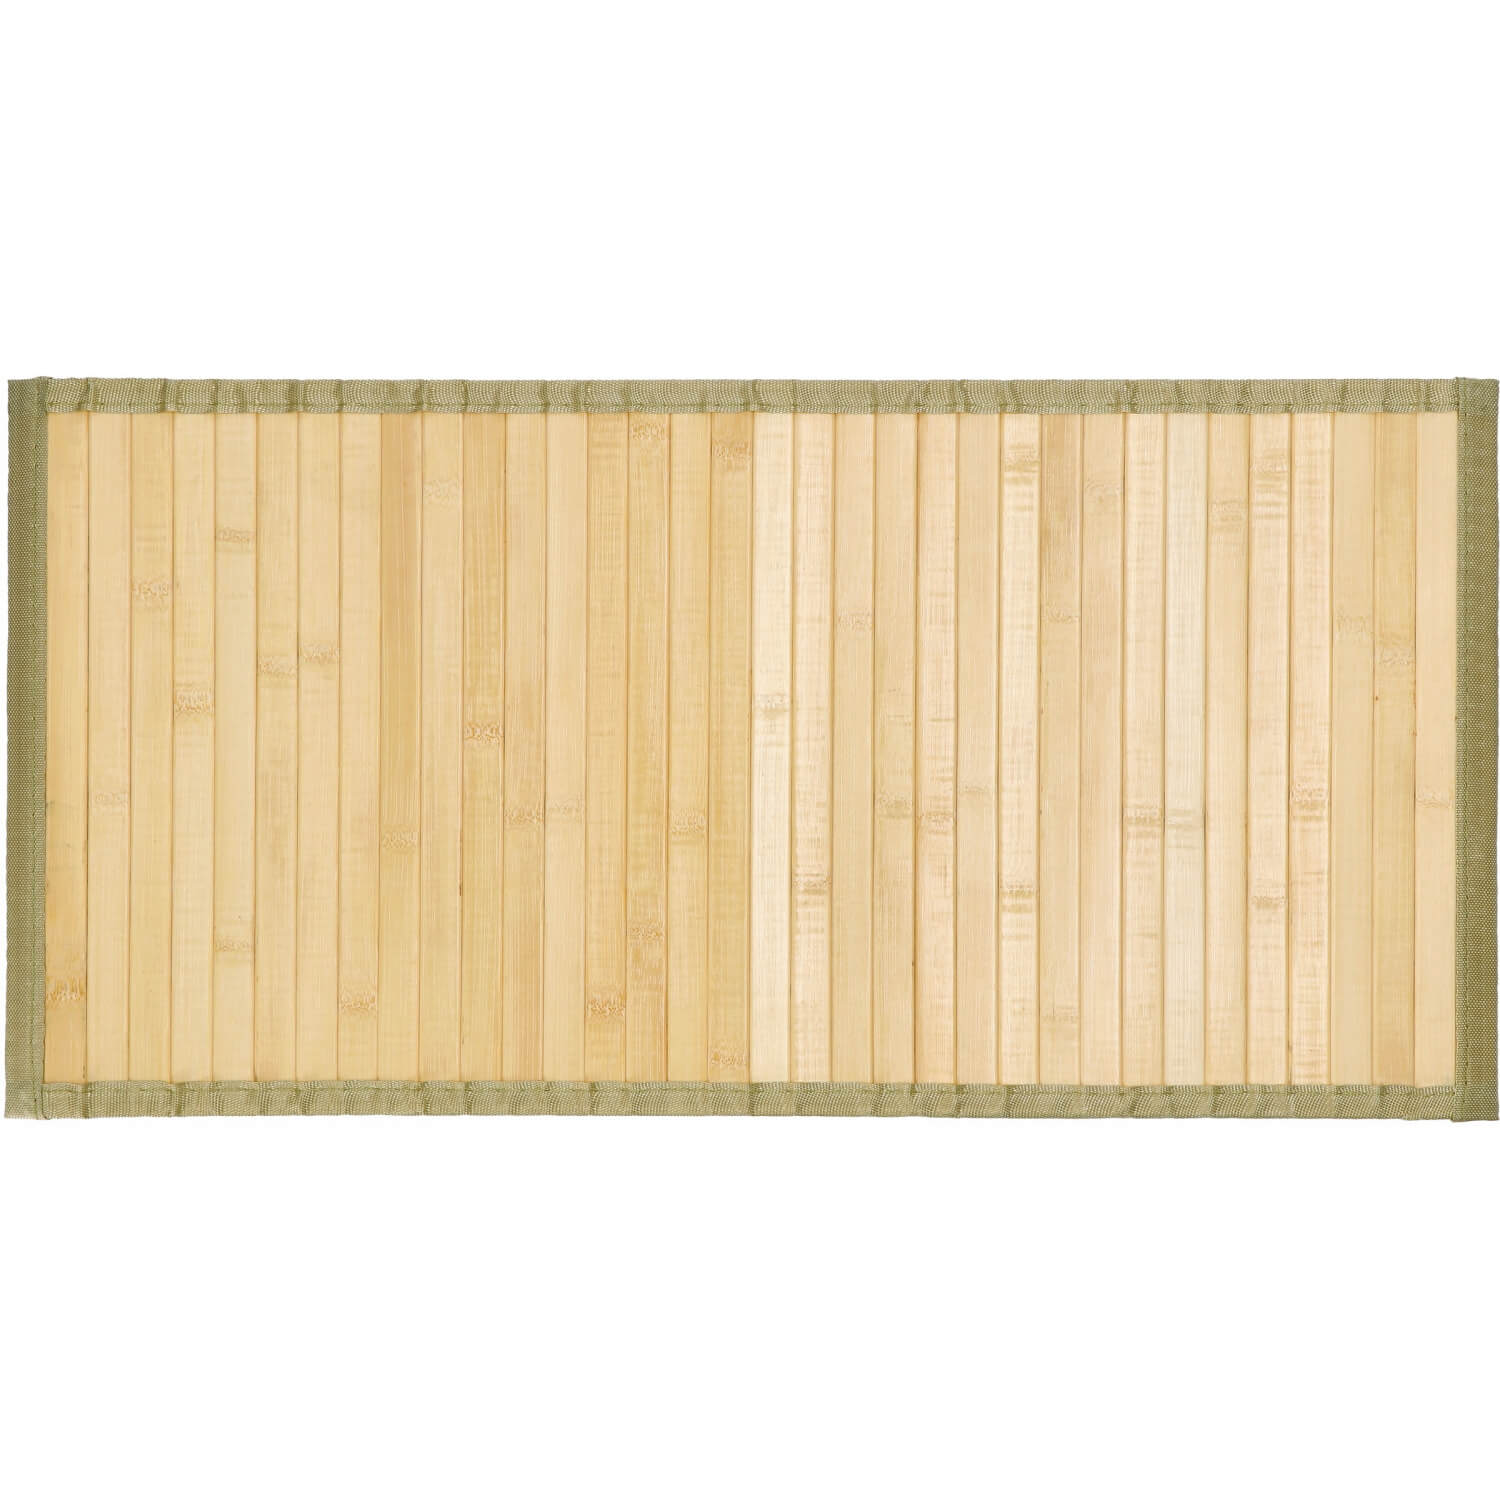 TAPPETO BAMBOO CM.50X180 ASS.4 COL.